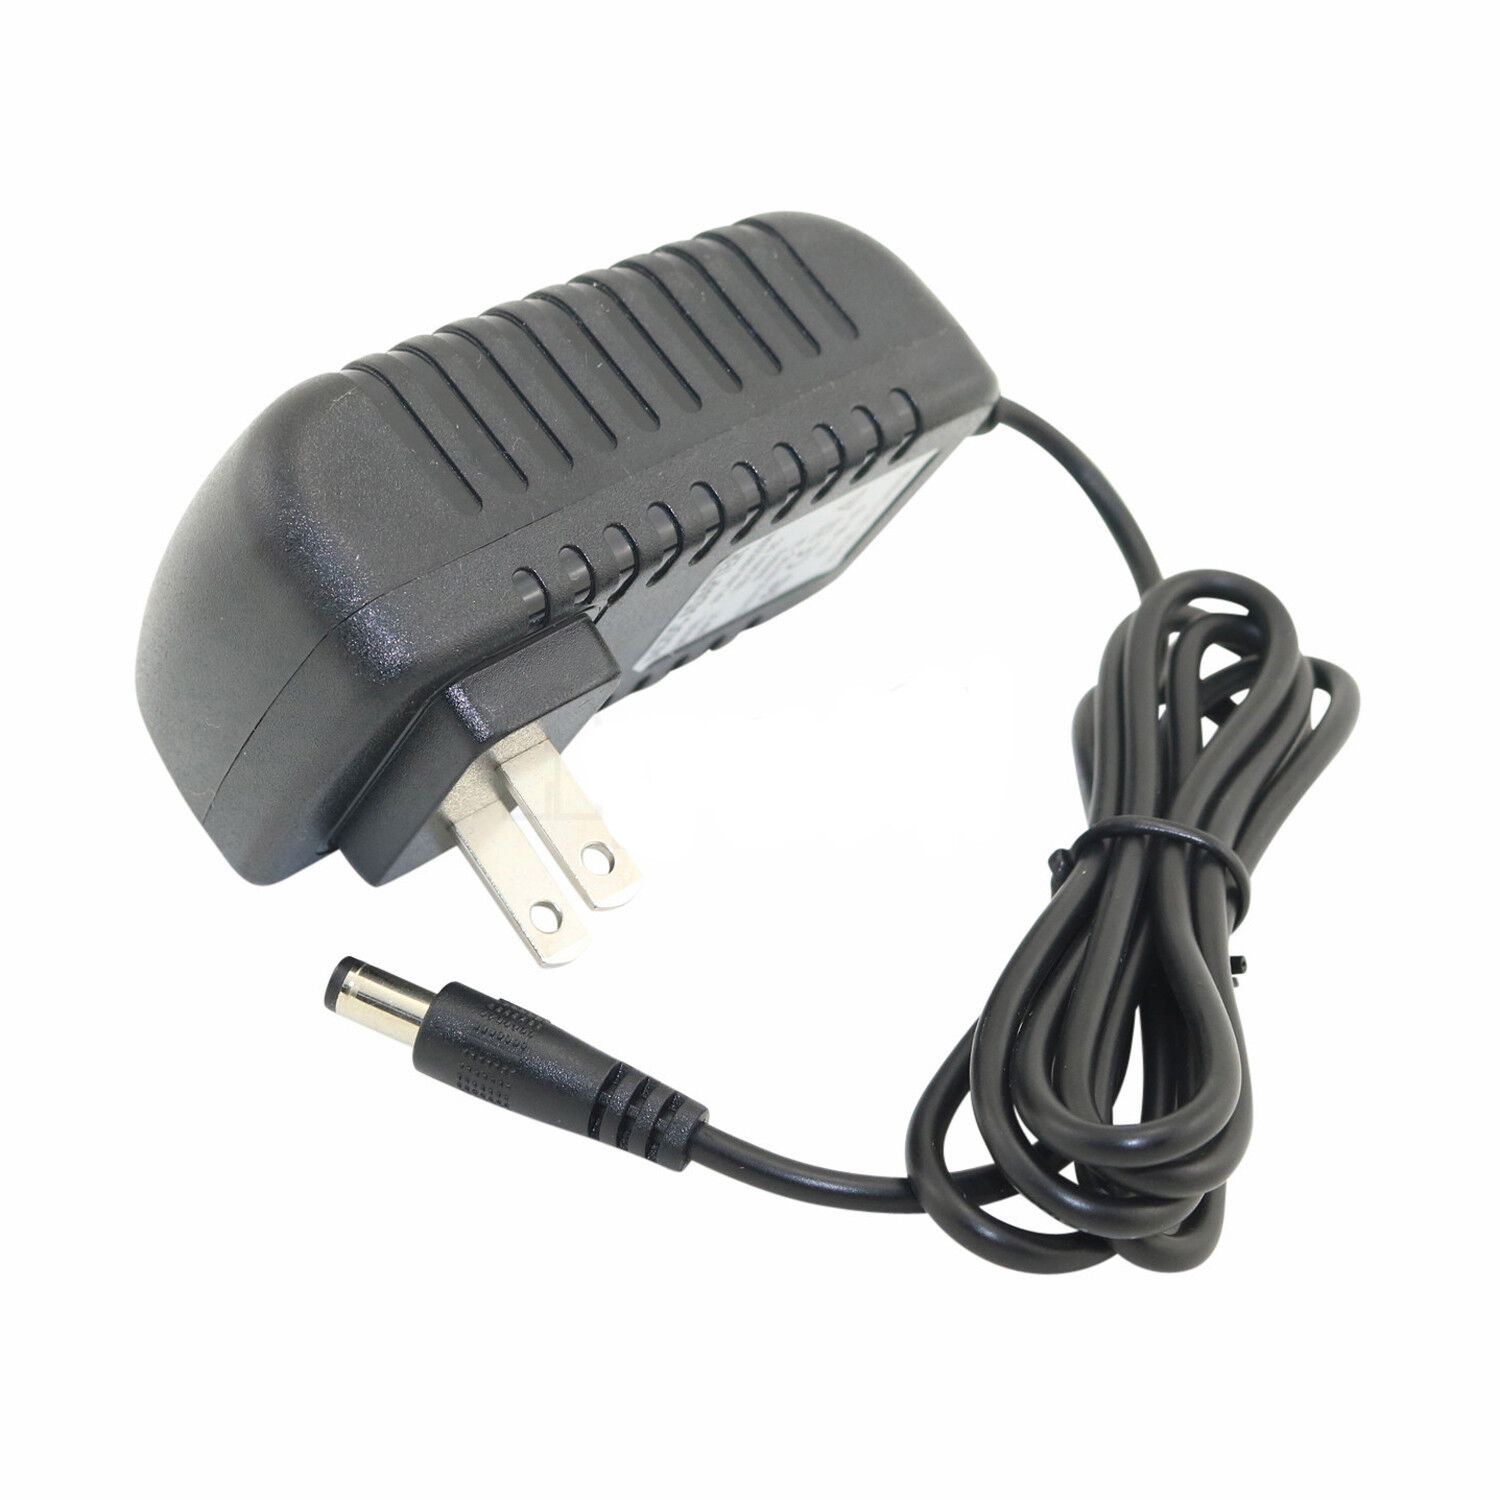 *Brand NEW*(12 Volt, 1500mA, 1.5m Cable) AC Adapter for RS-AB015J00 Power Supply